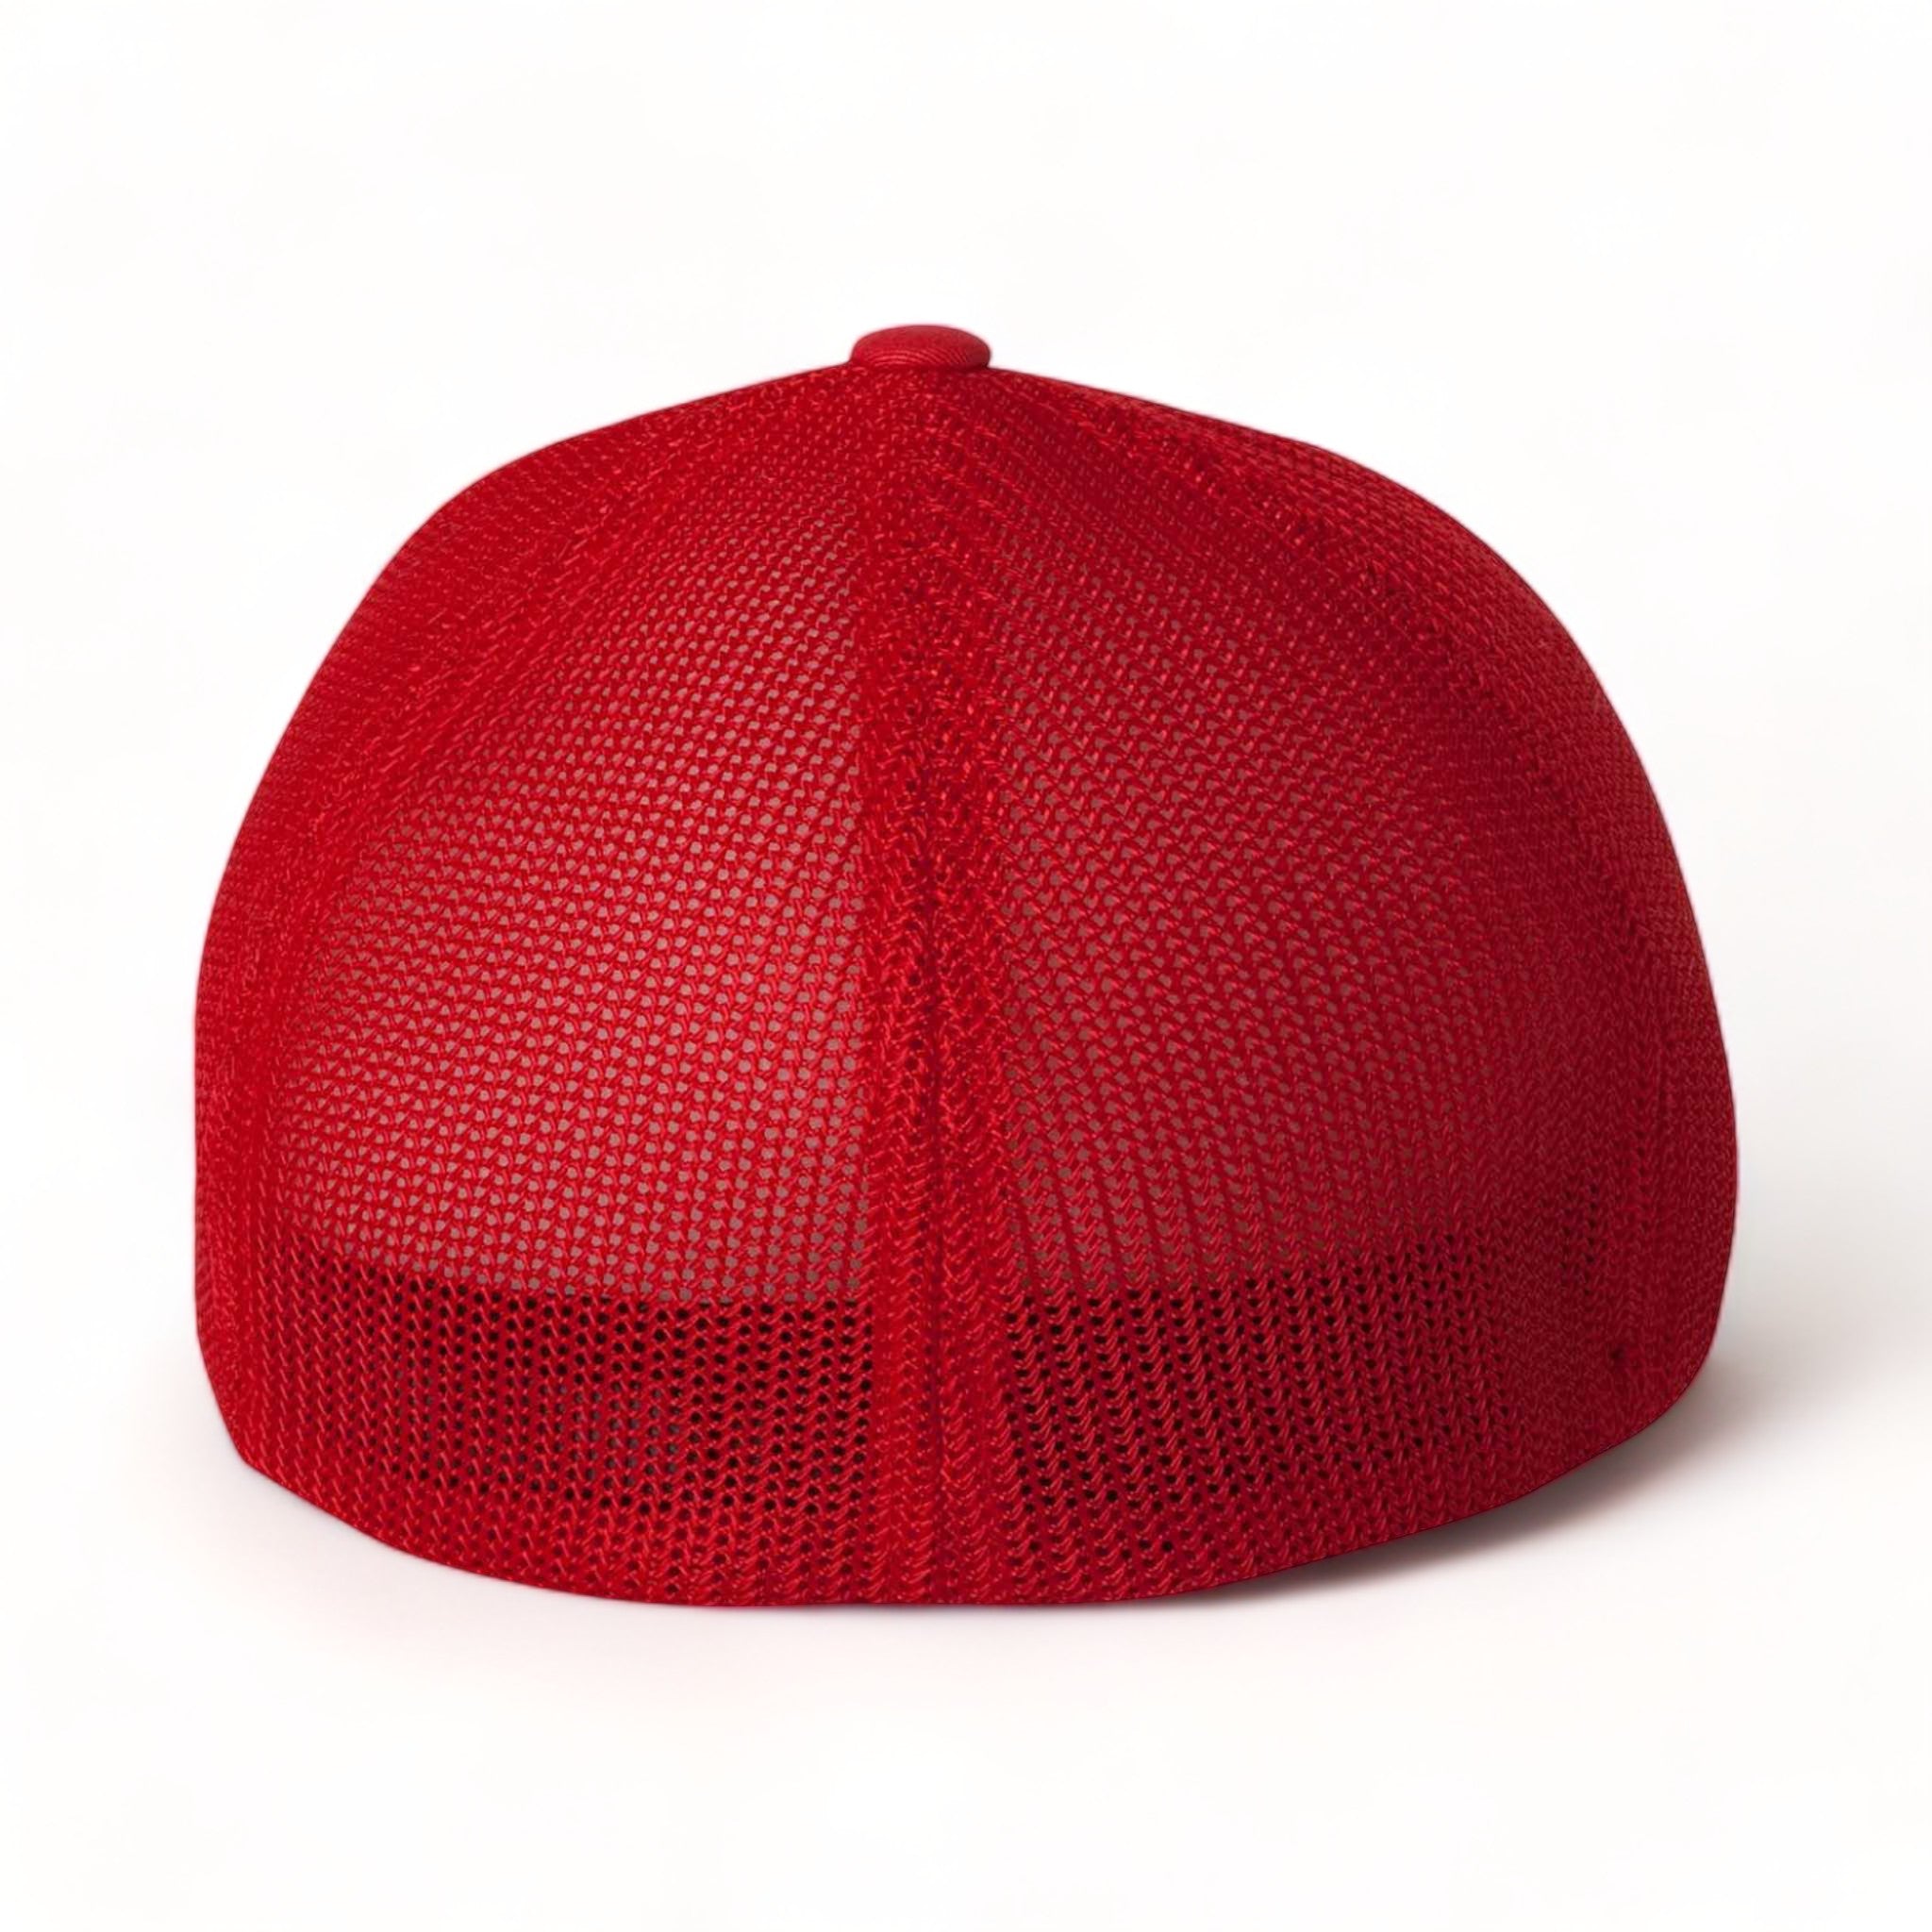 Back view of Flexfit 6511 custom hat in red